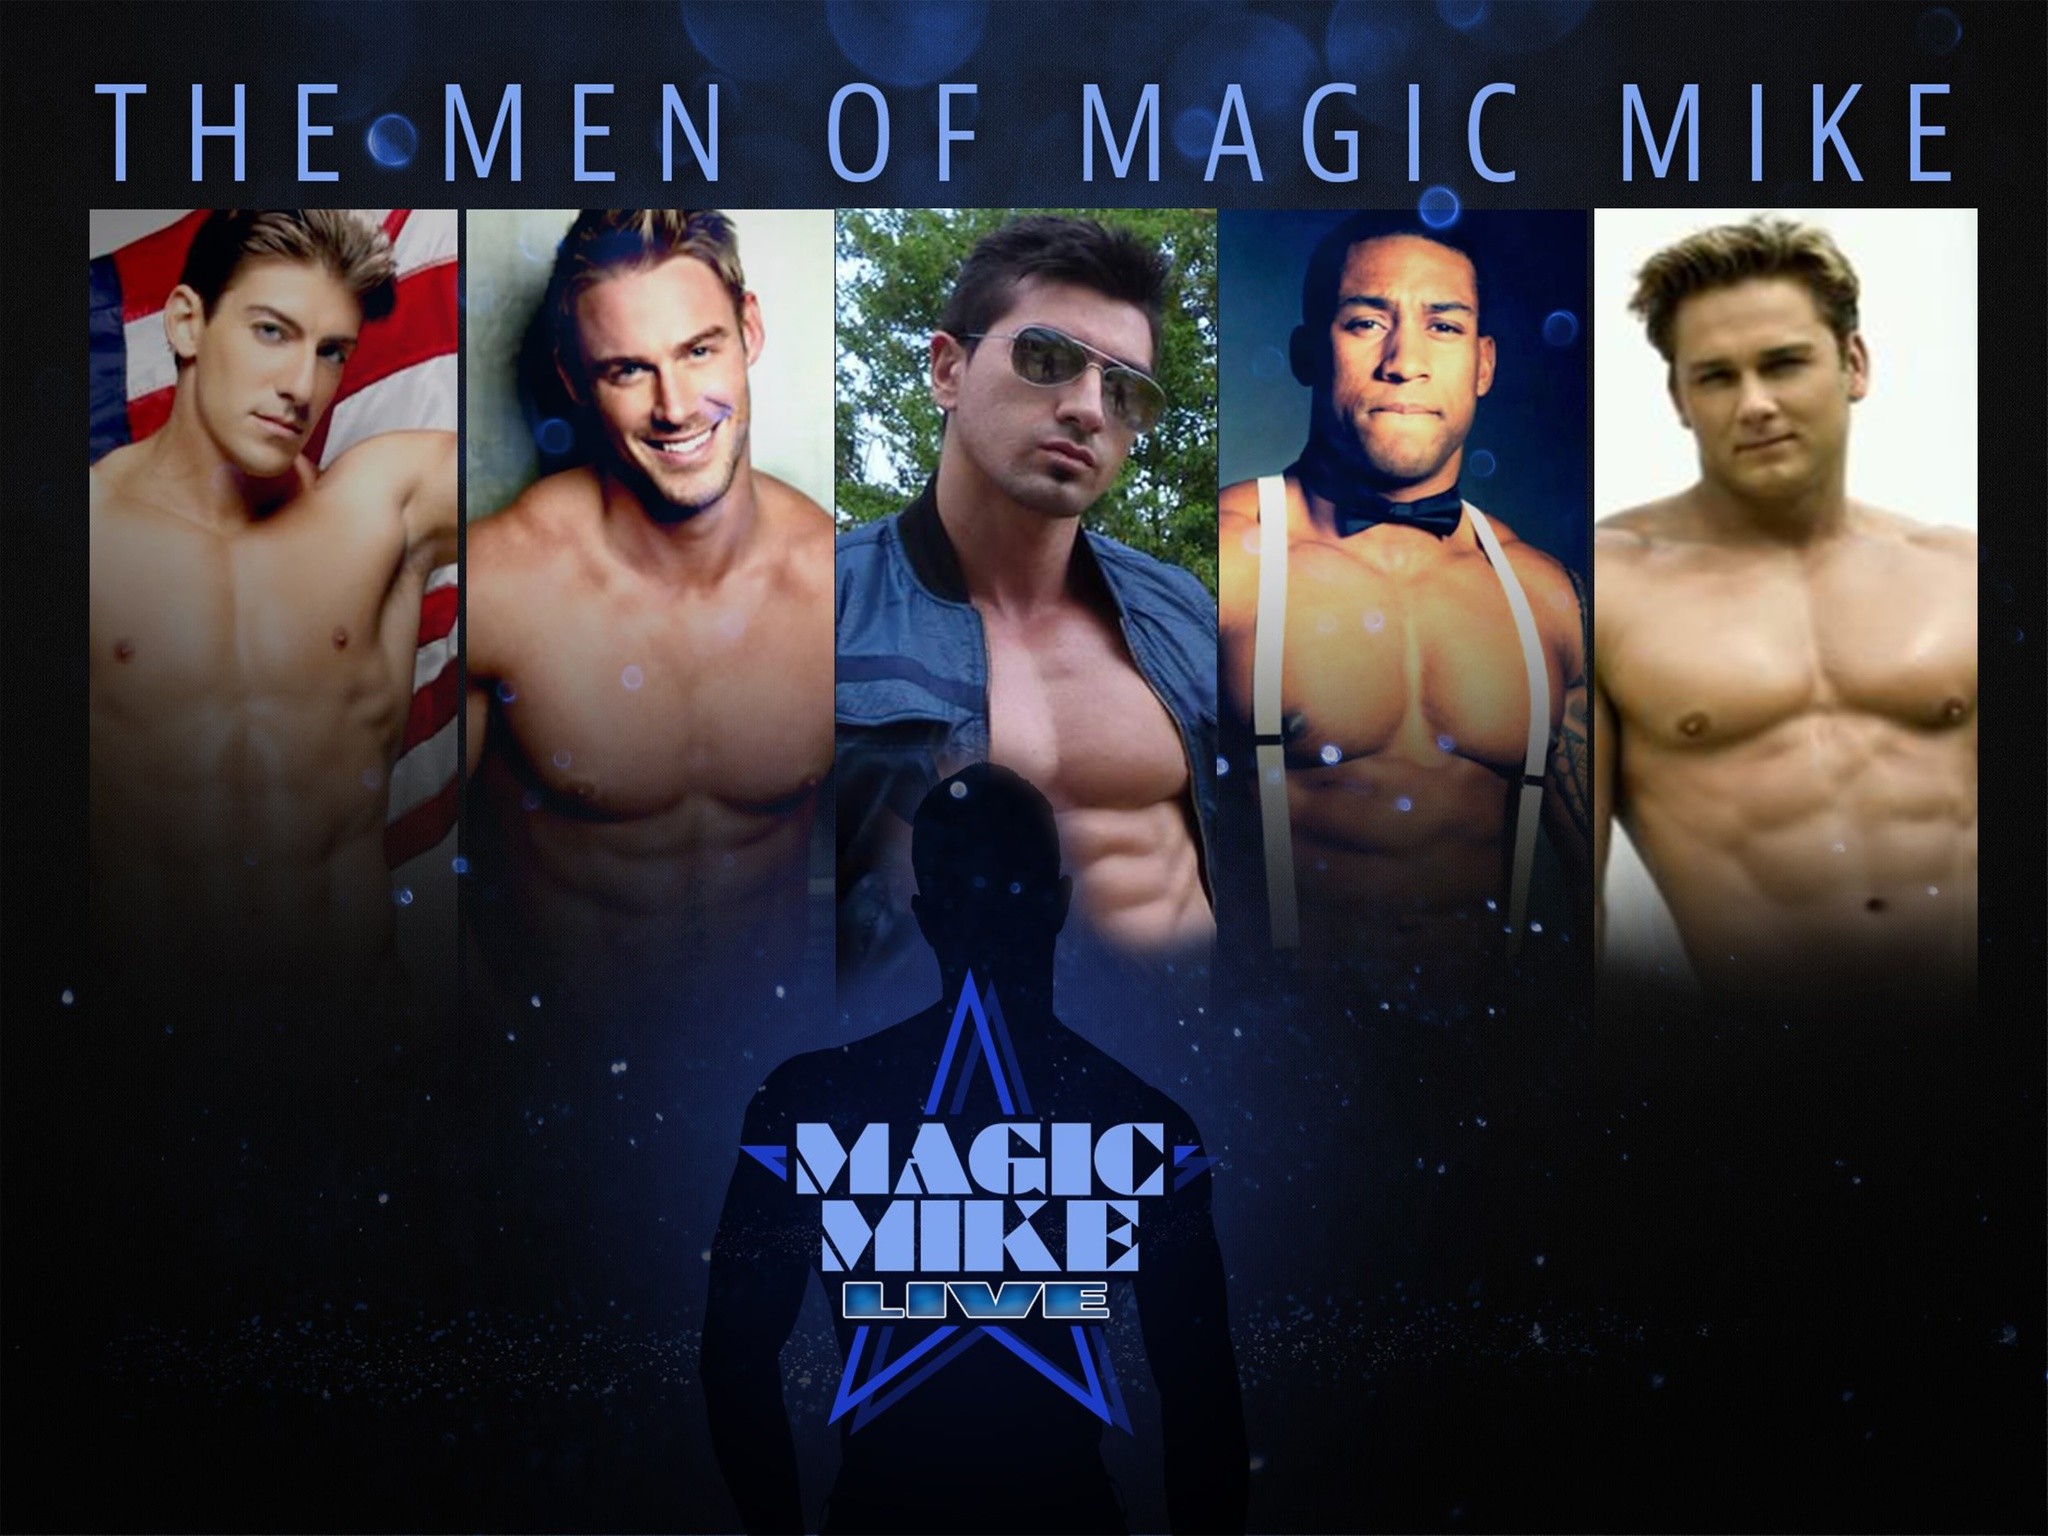 2048x1536 Alright ladies (and gentlemen), you've been waiting to make it rain on some  sexy hot men and tonight's your chance to make that fantasy come true!